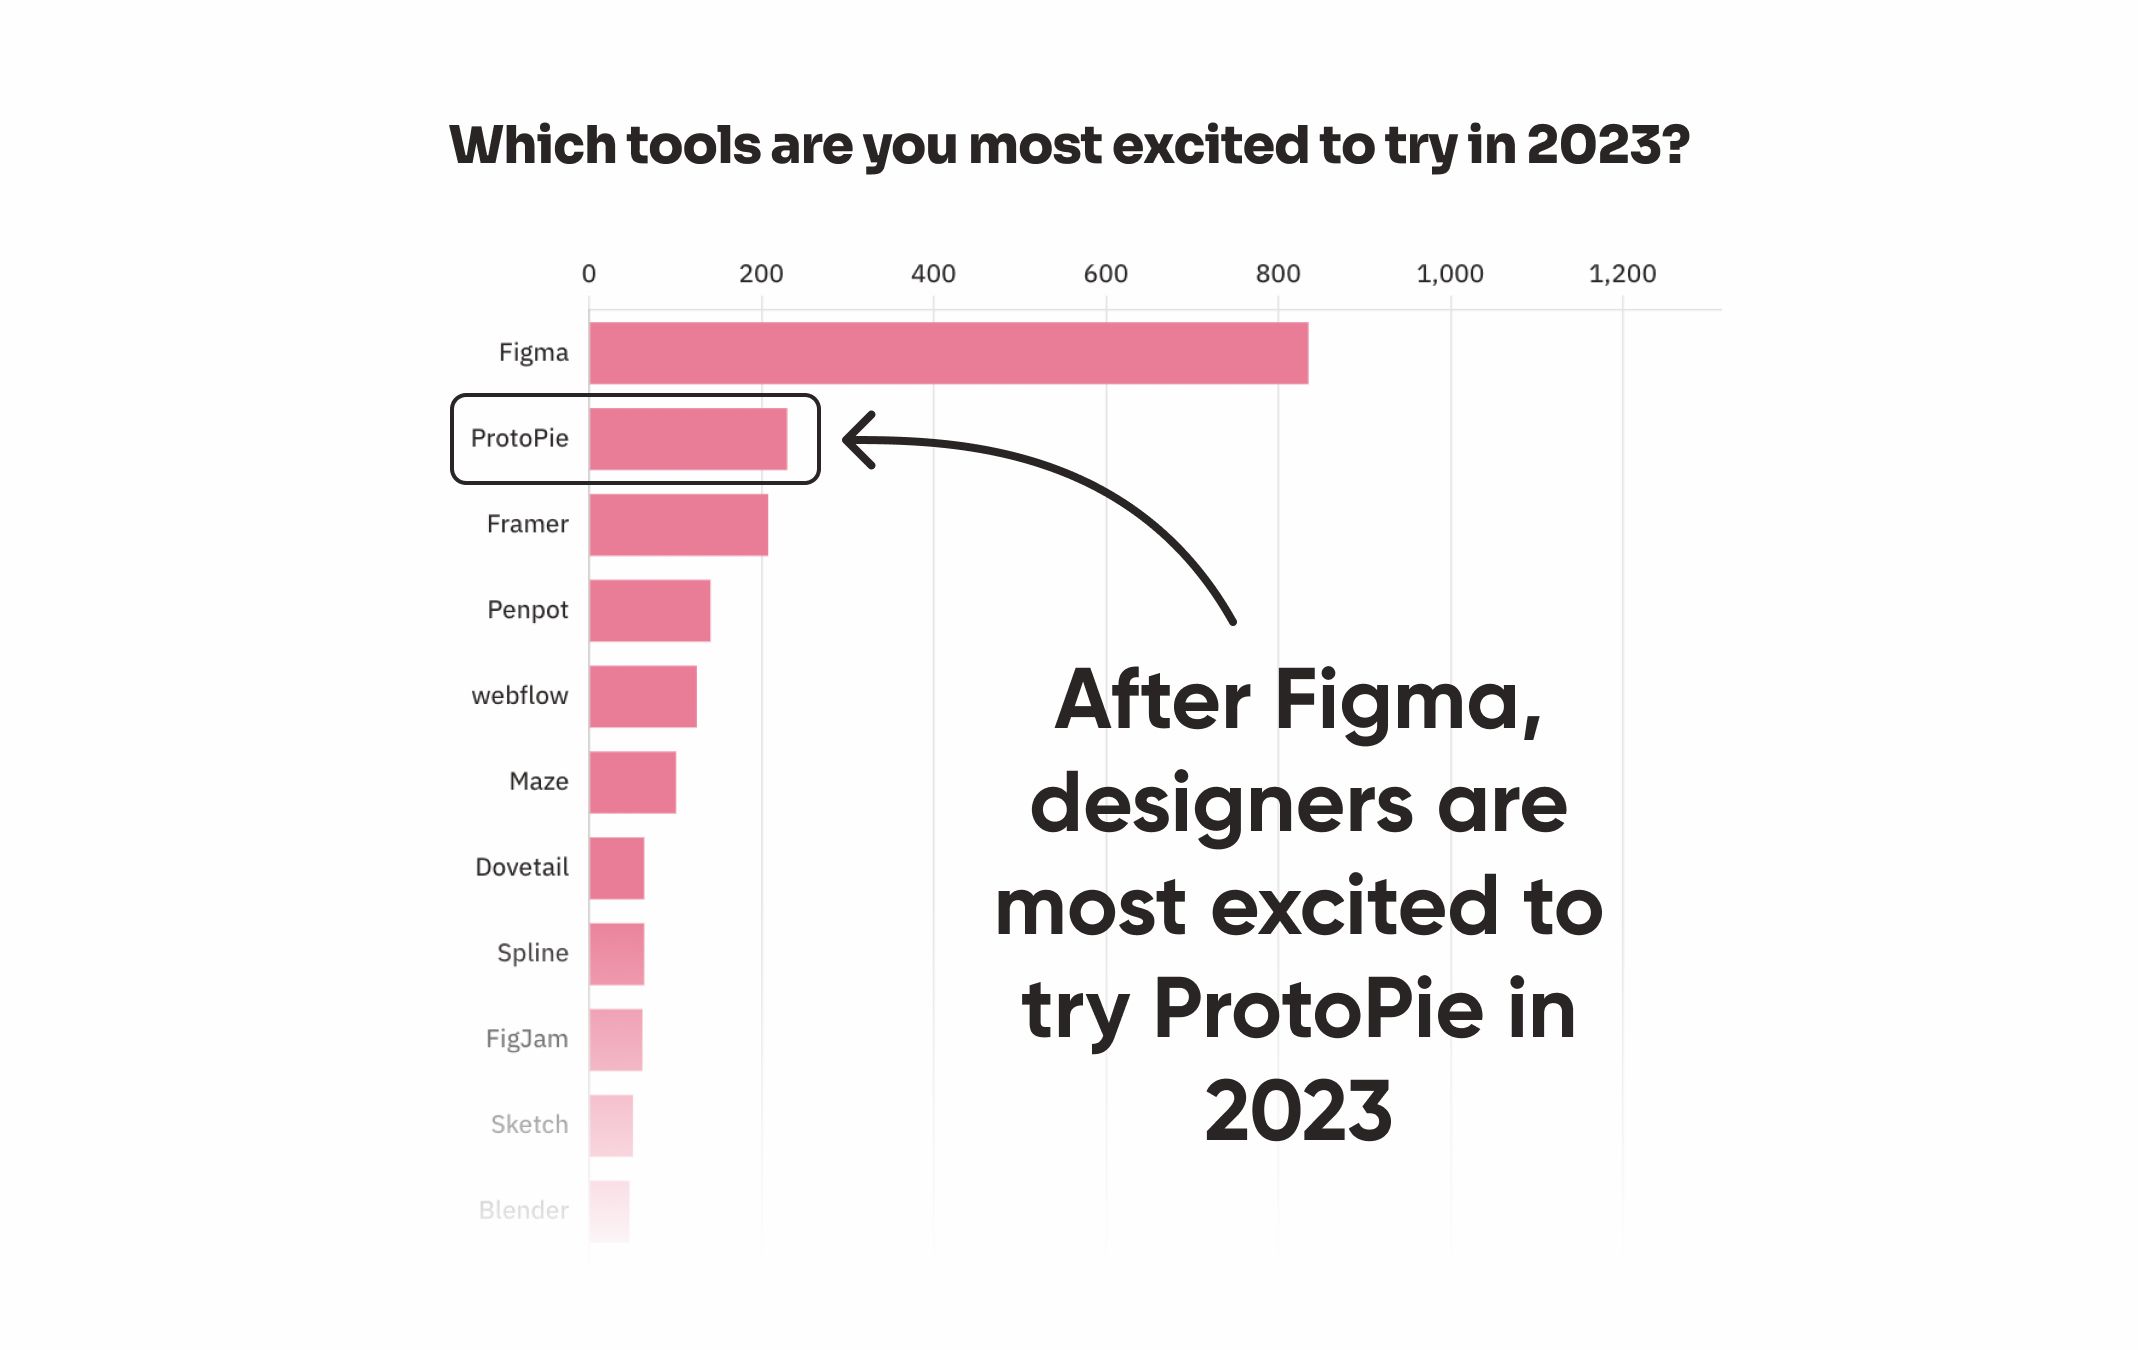 Which tools users are excited about in 2023